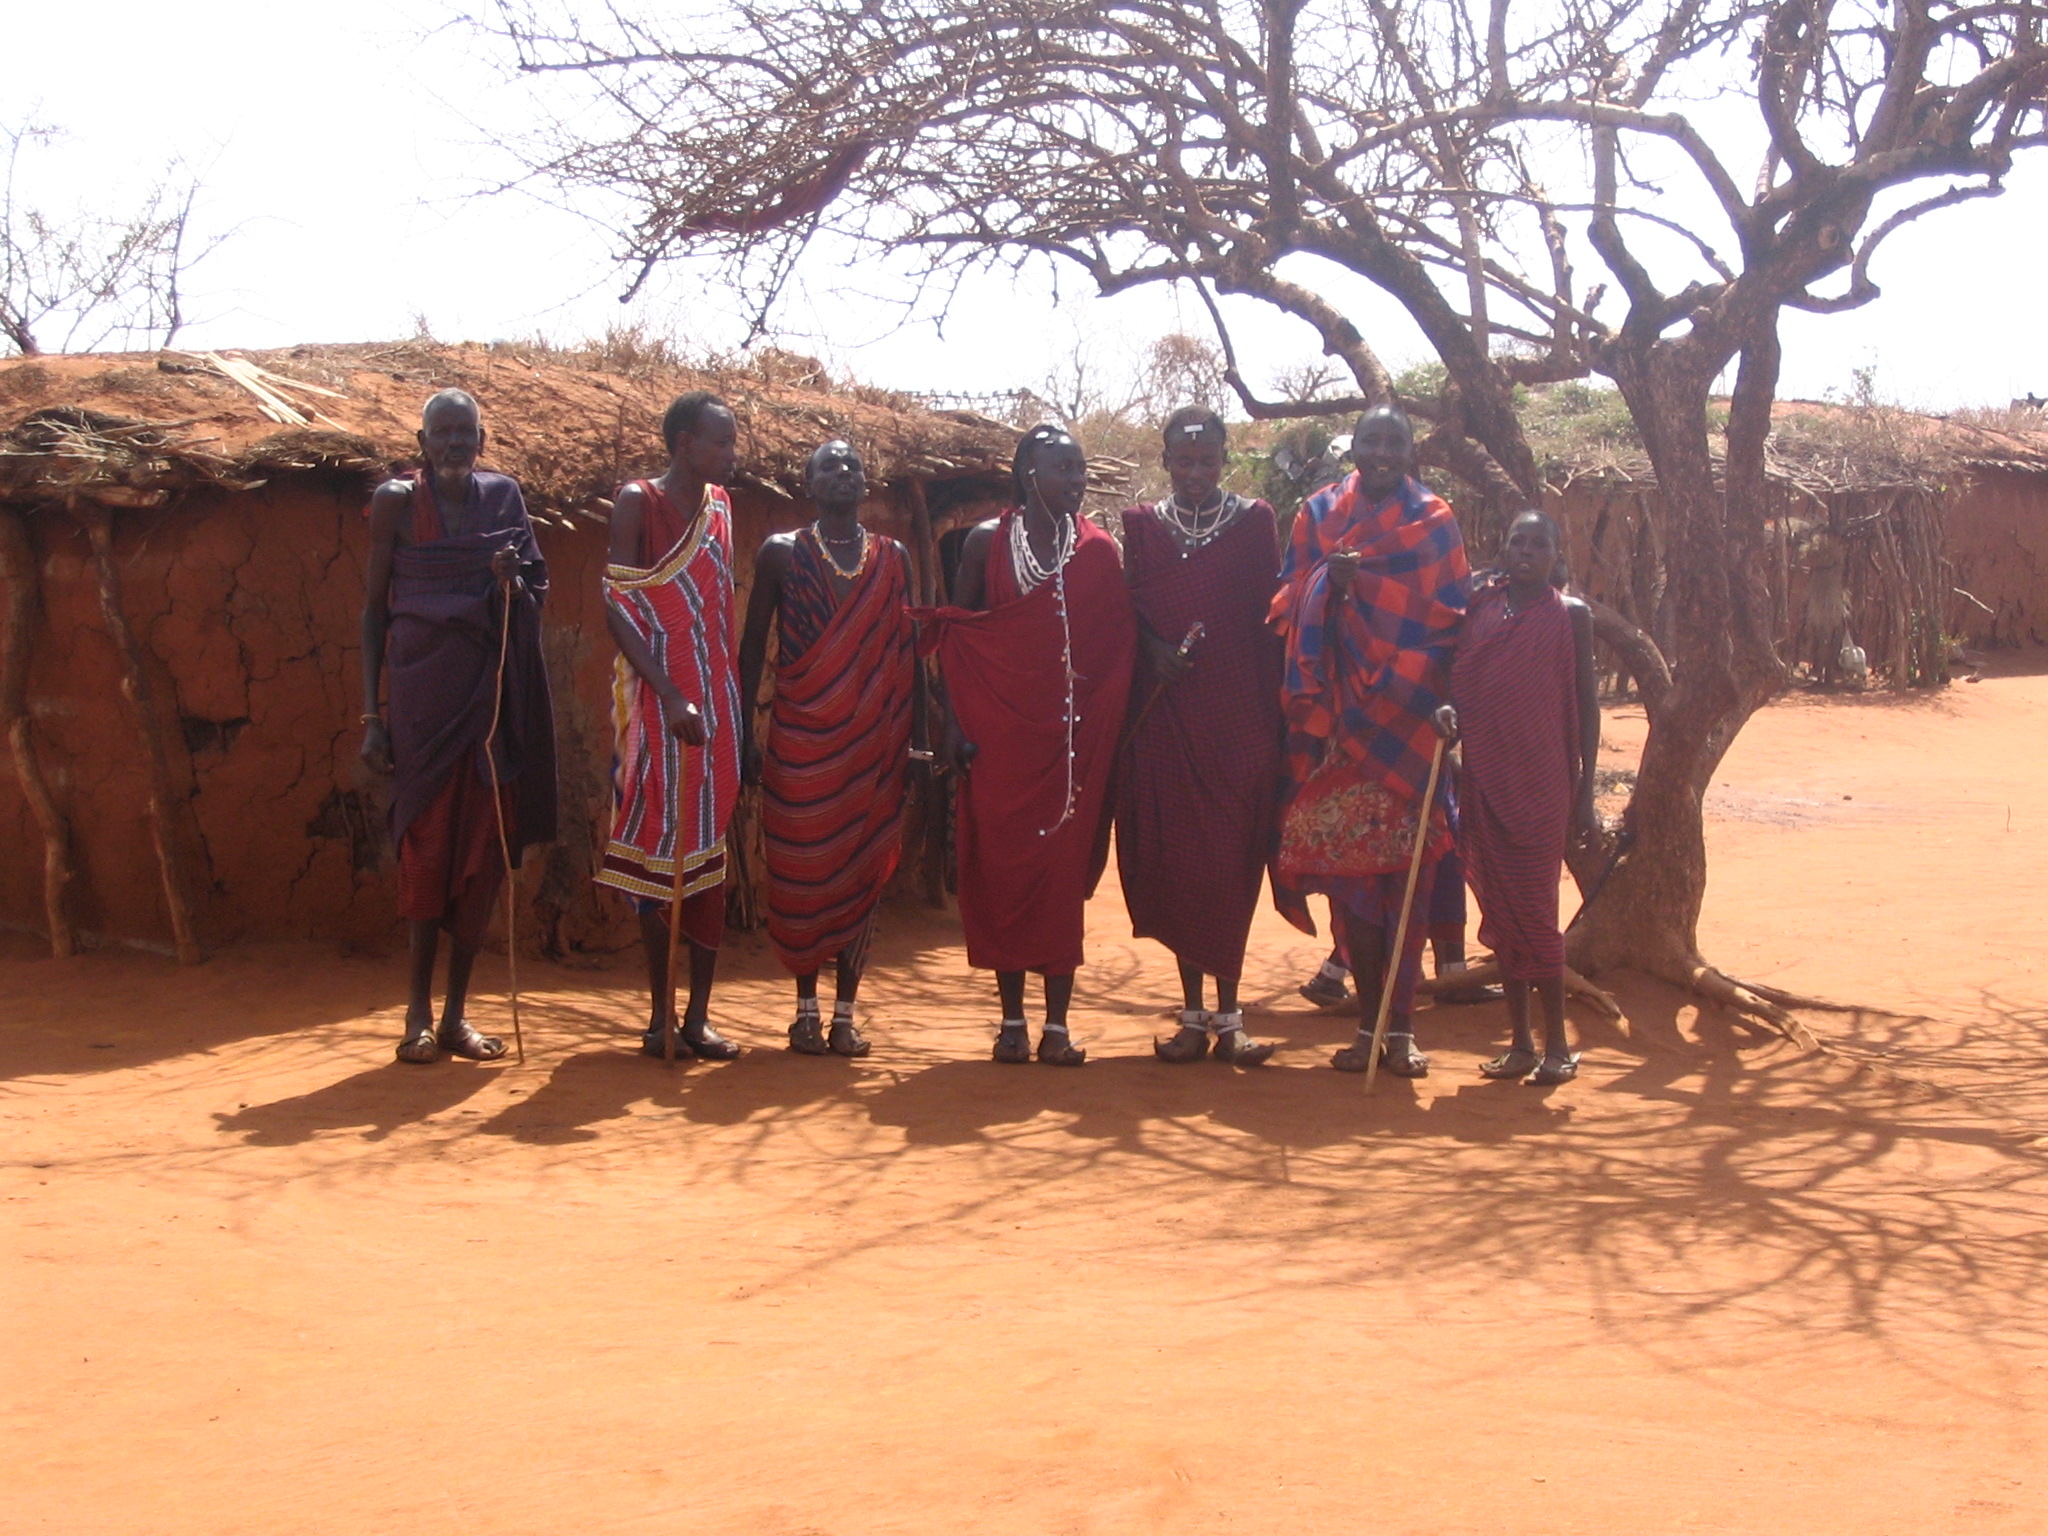 Maasai people in a village on the A109 road, Kenya 2